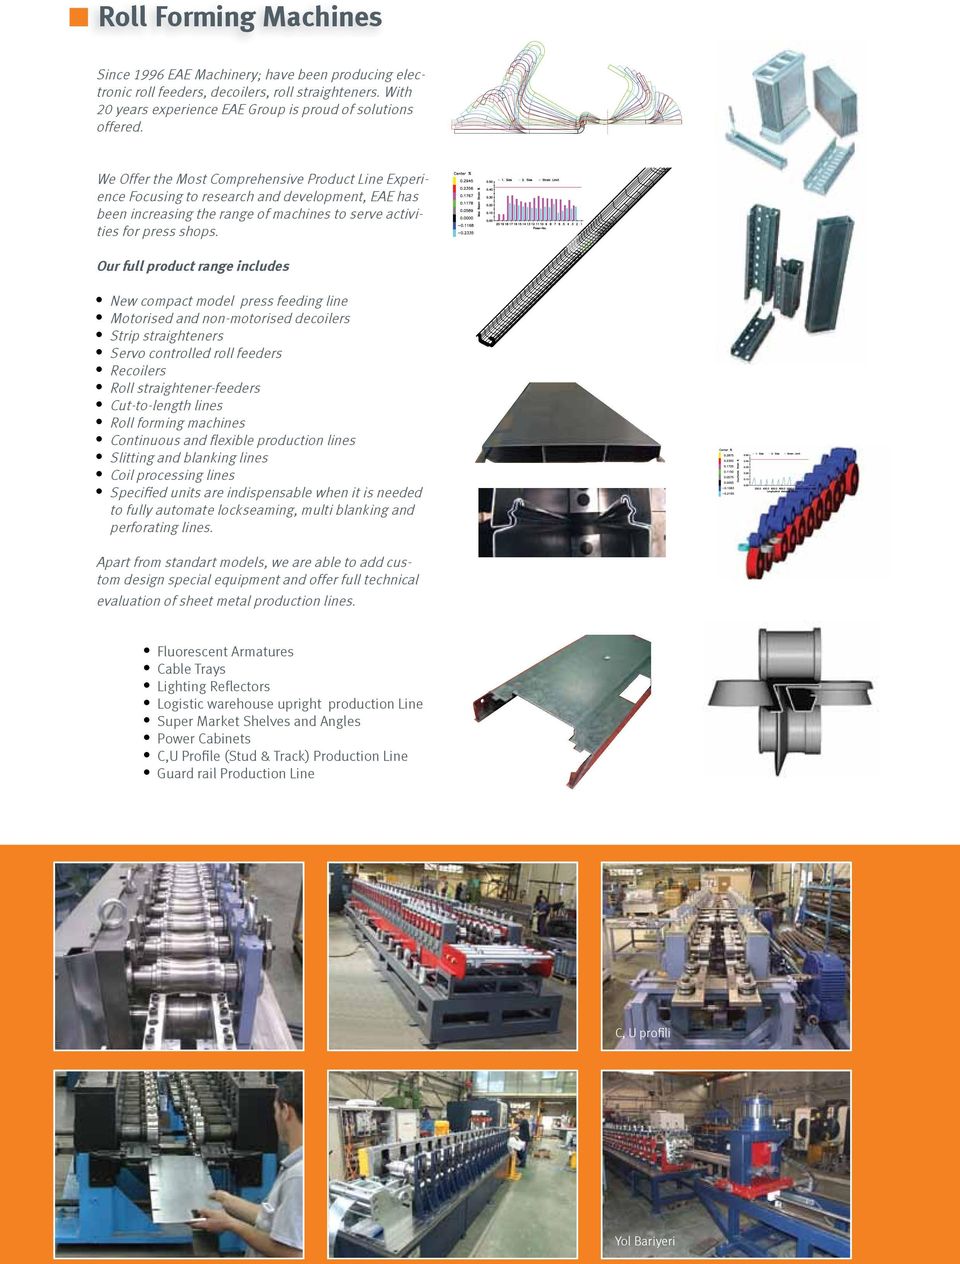 Our full product range includes New compact model press feeding line Motorised and non-motorised decoilers Strip straighteners Servo controlled roll feeders Recoilers Roll straightener-feeders